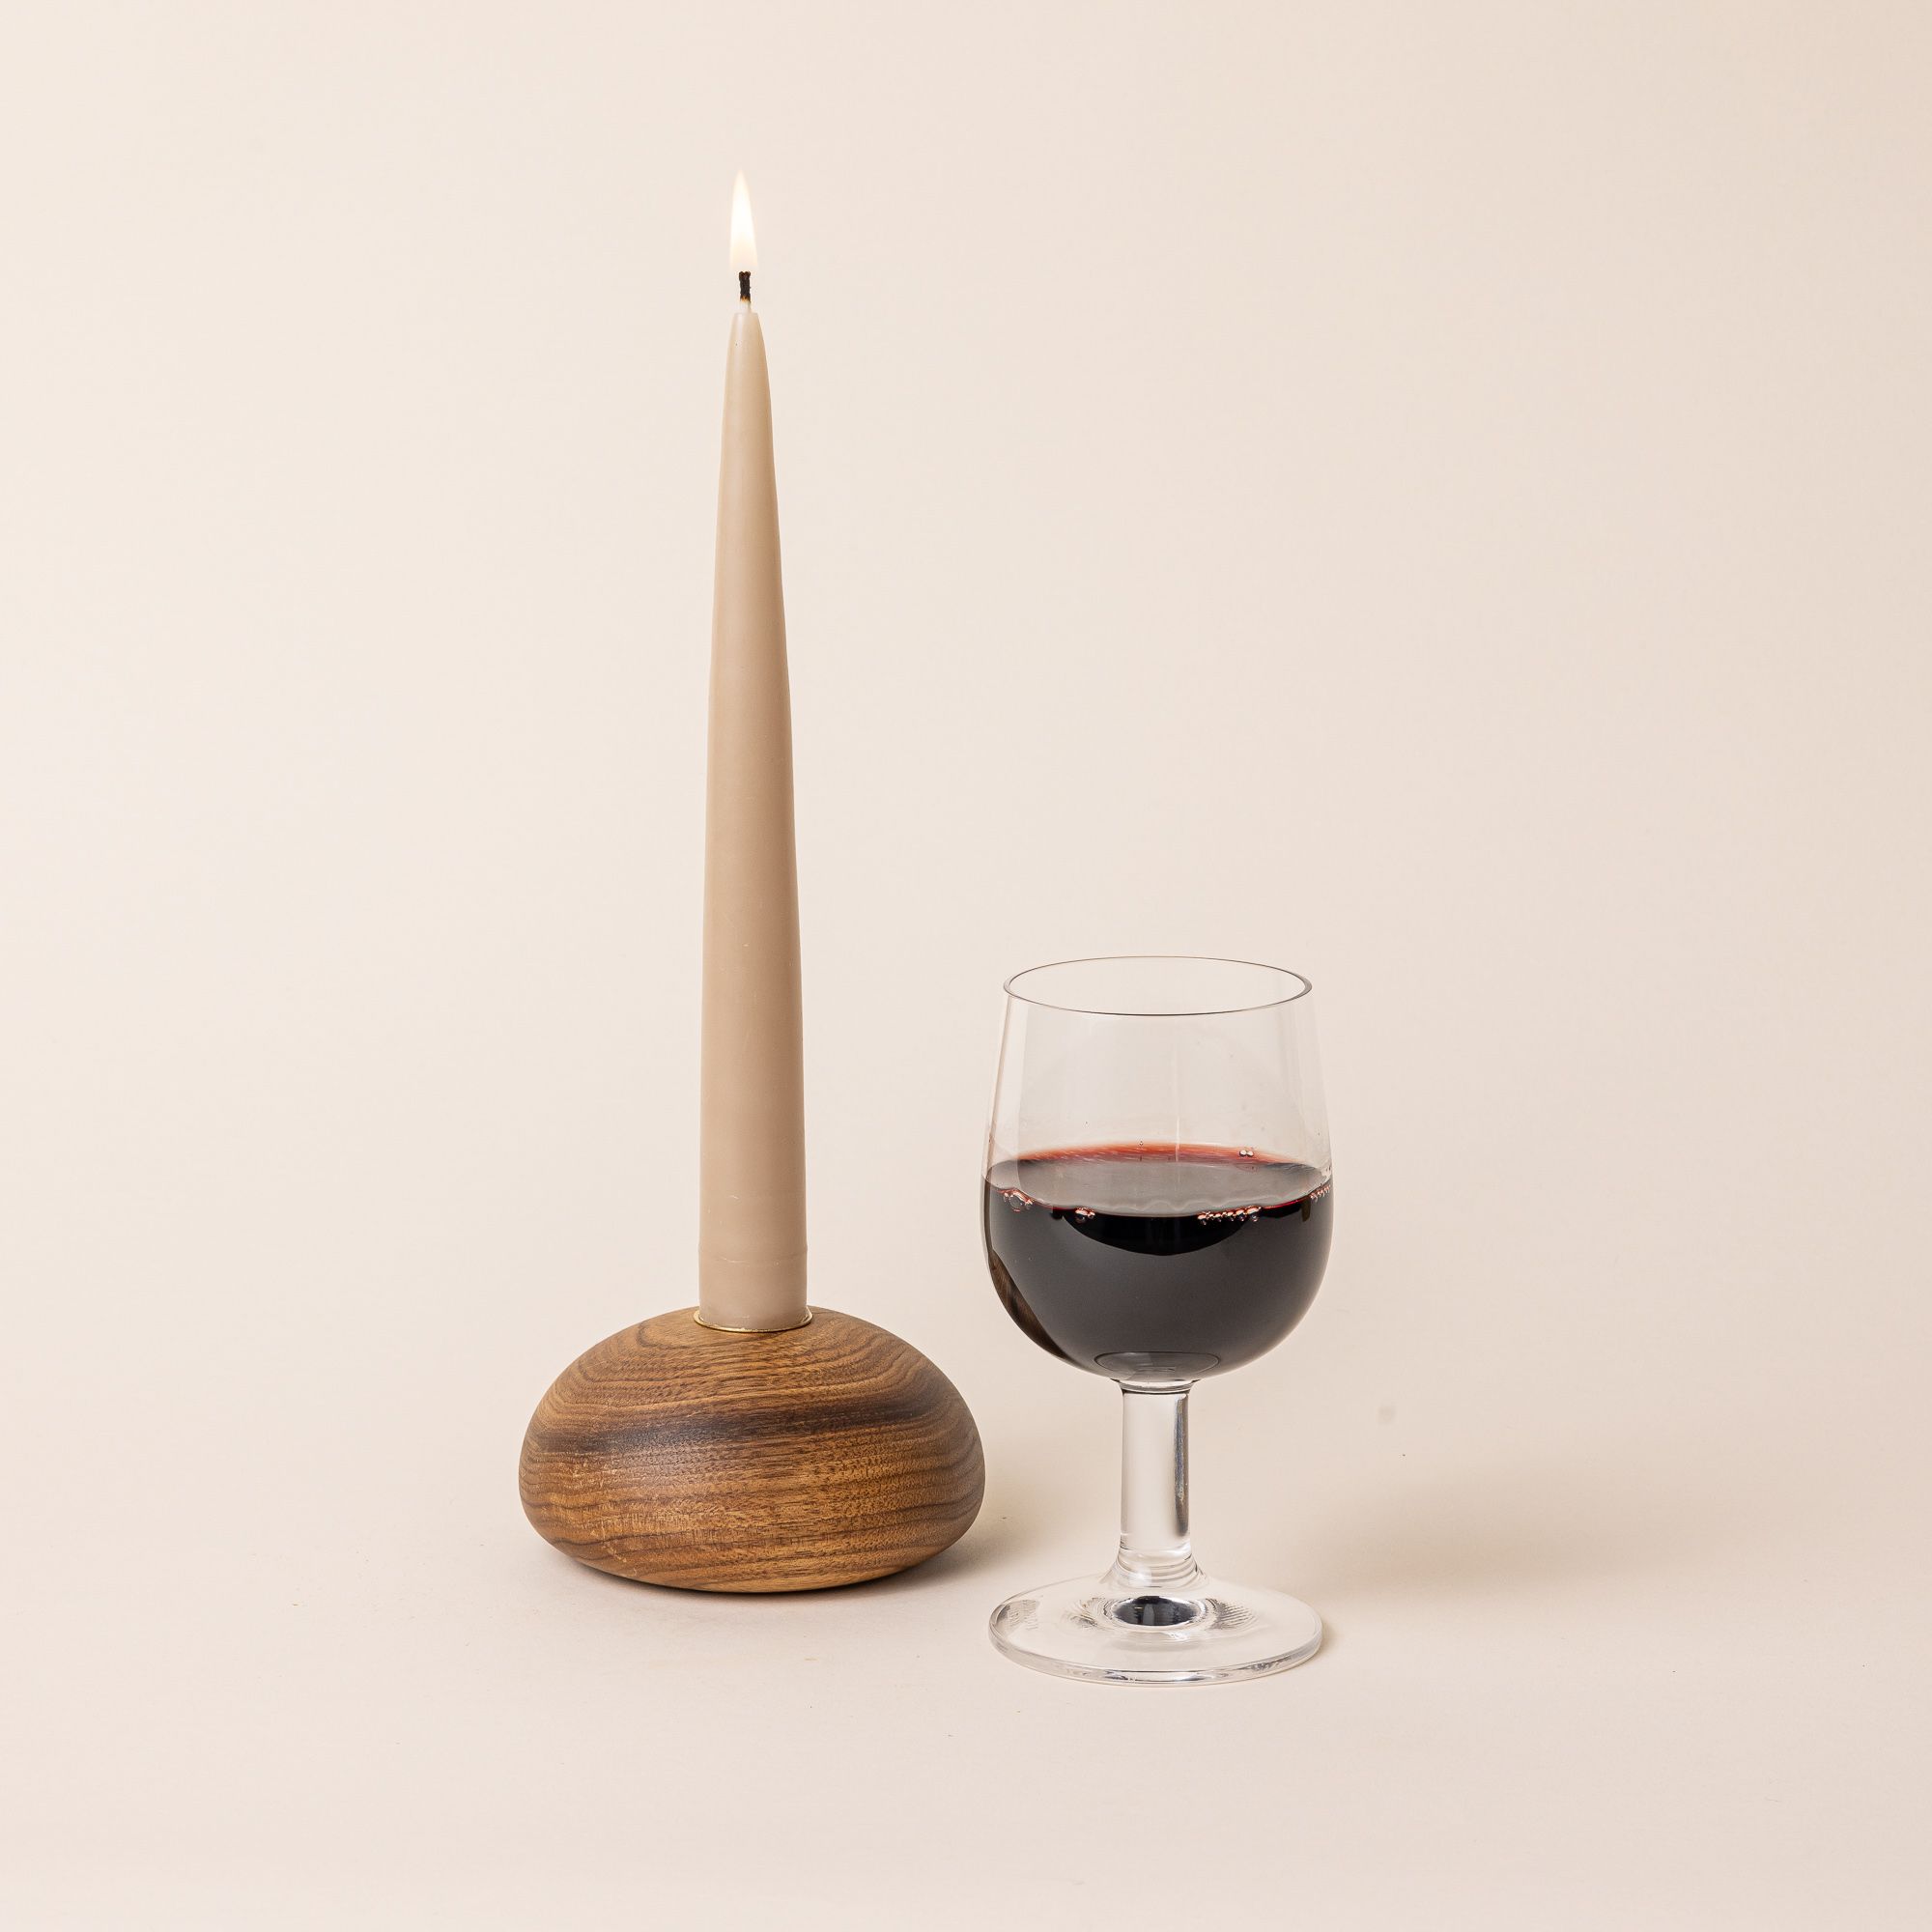 A clear wine glass with a short stem and wide cup, filled with red wine. Next to the glass is a lit tapered candle in a dome wood candlestick holder.